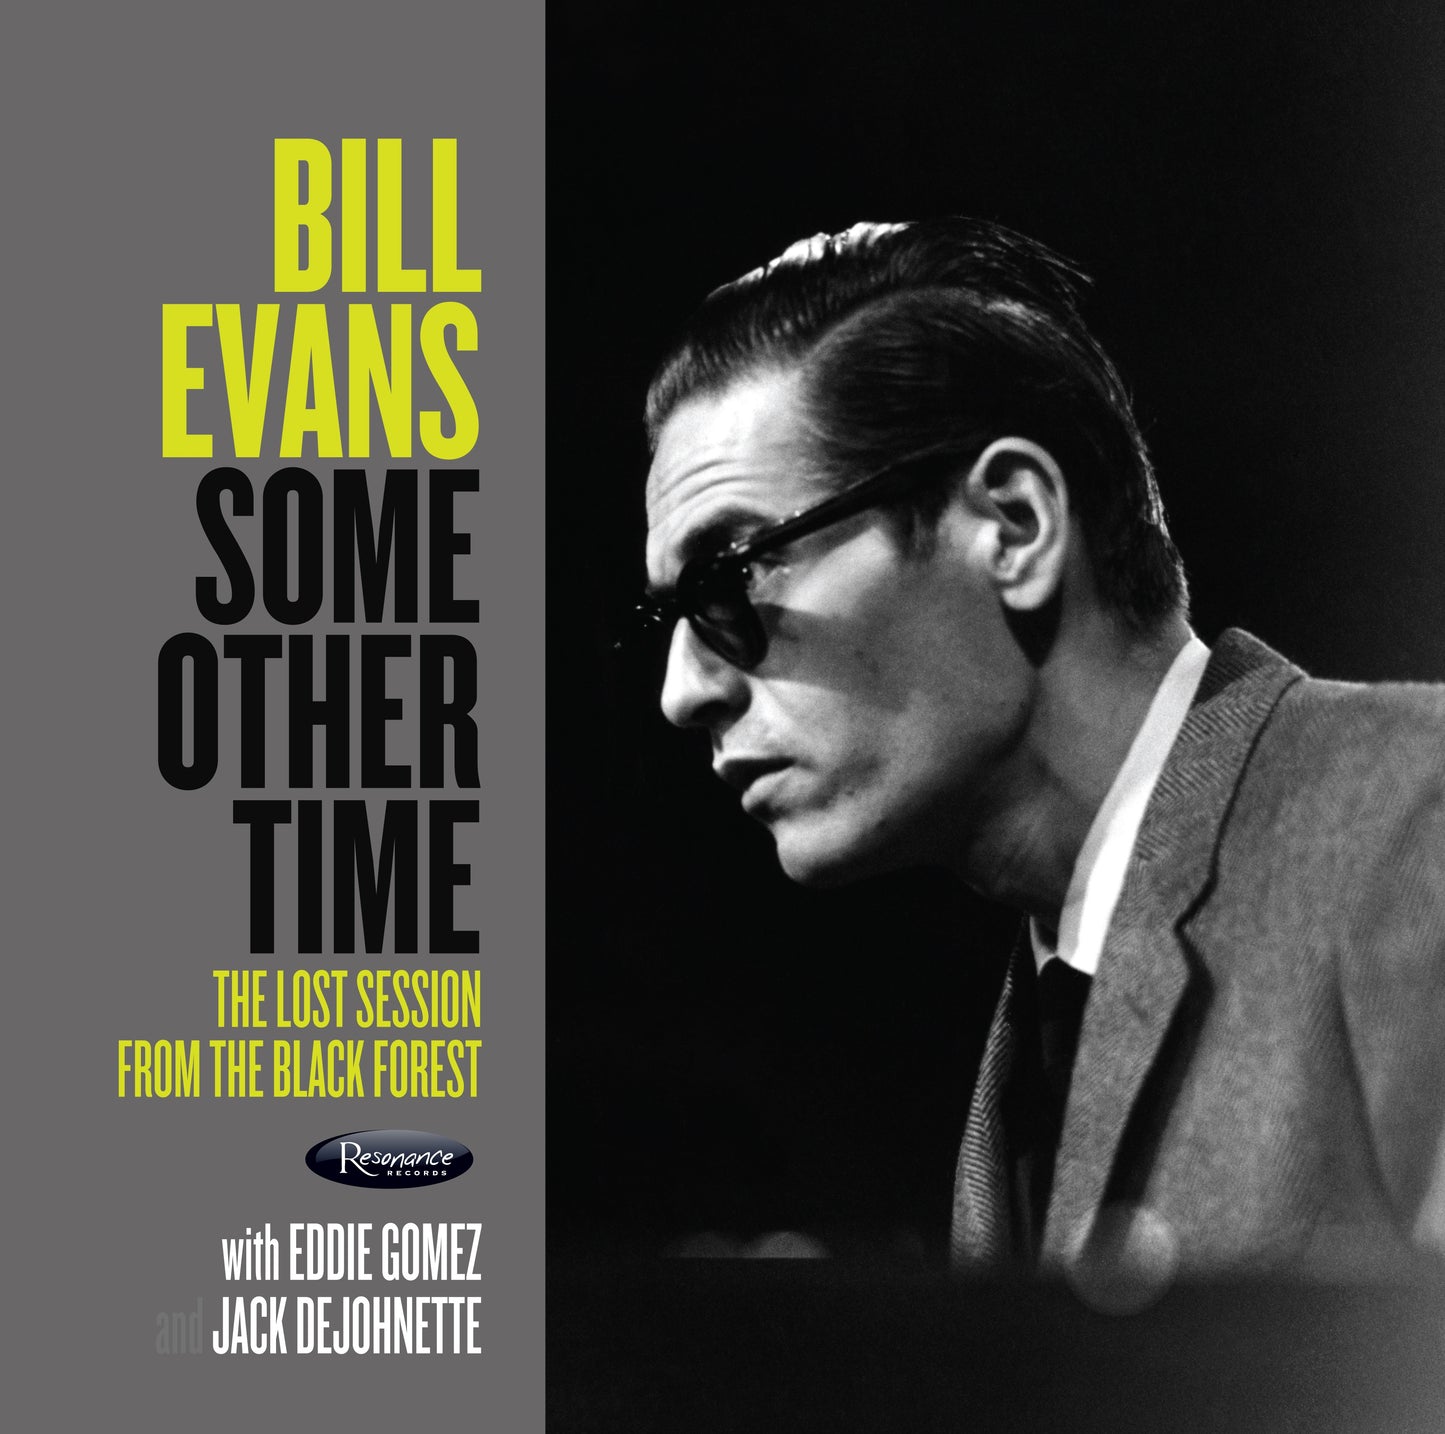 Bill Evans - Some Other Time: The Lost Session From The Black Forest | RSD 2020